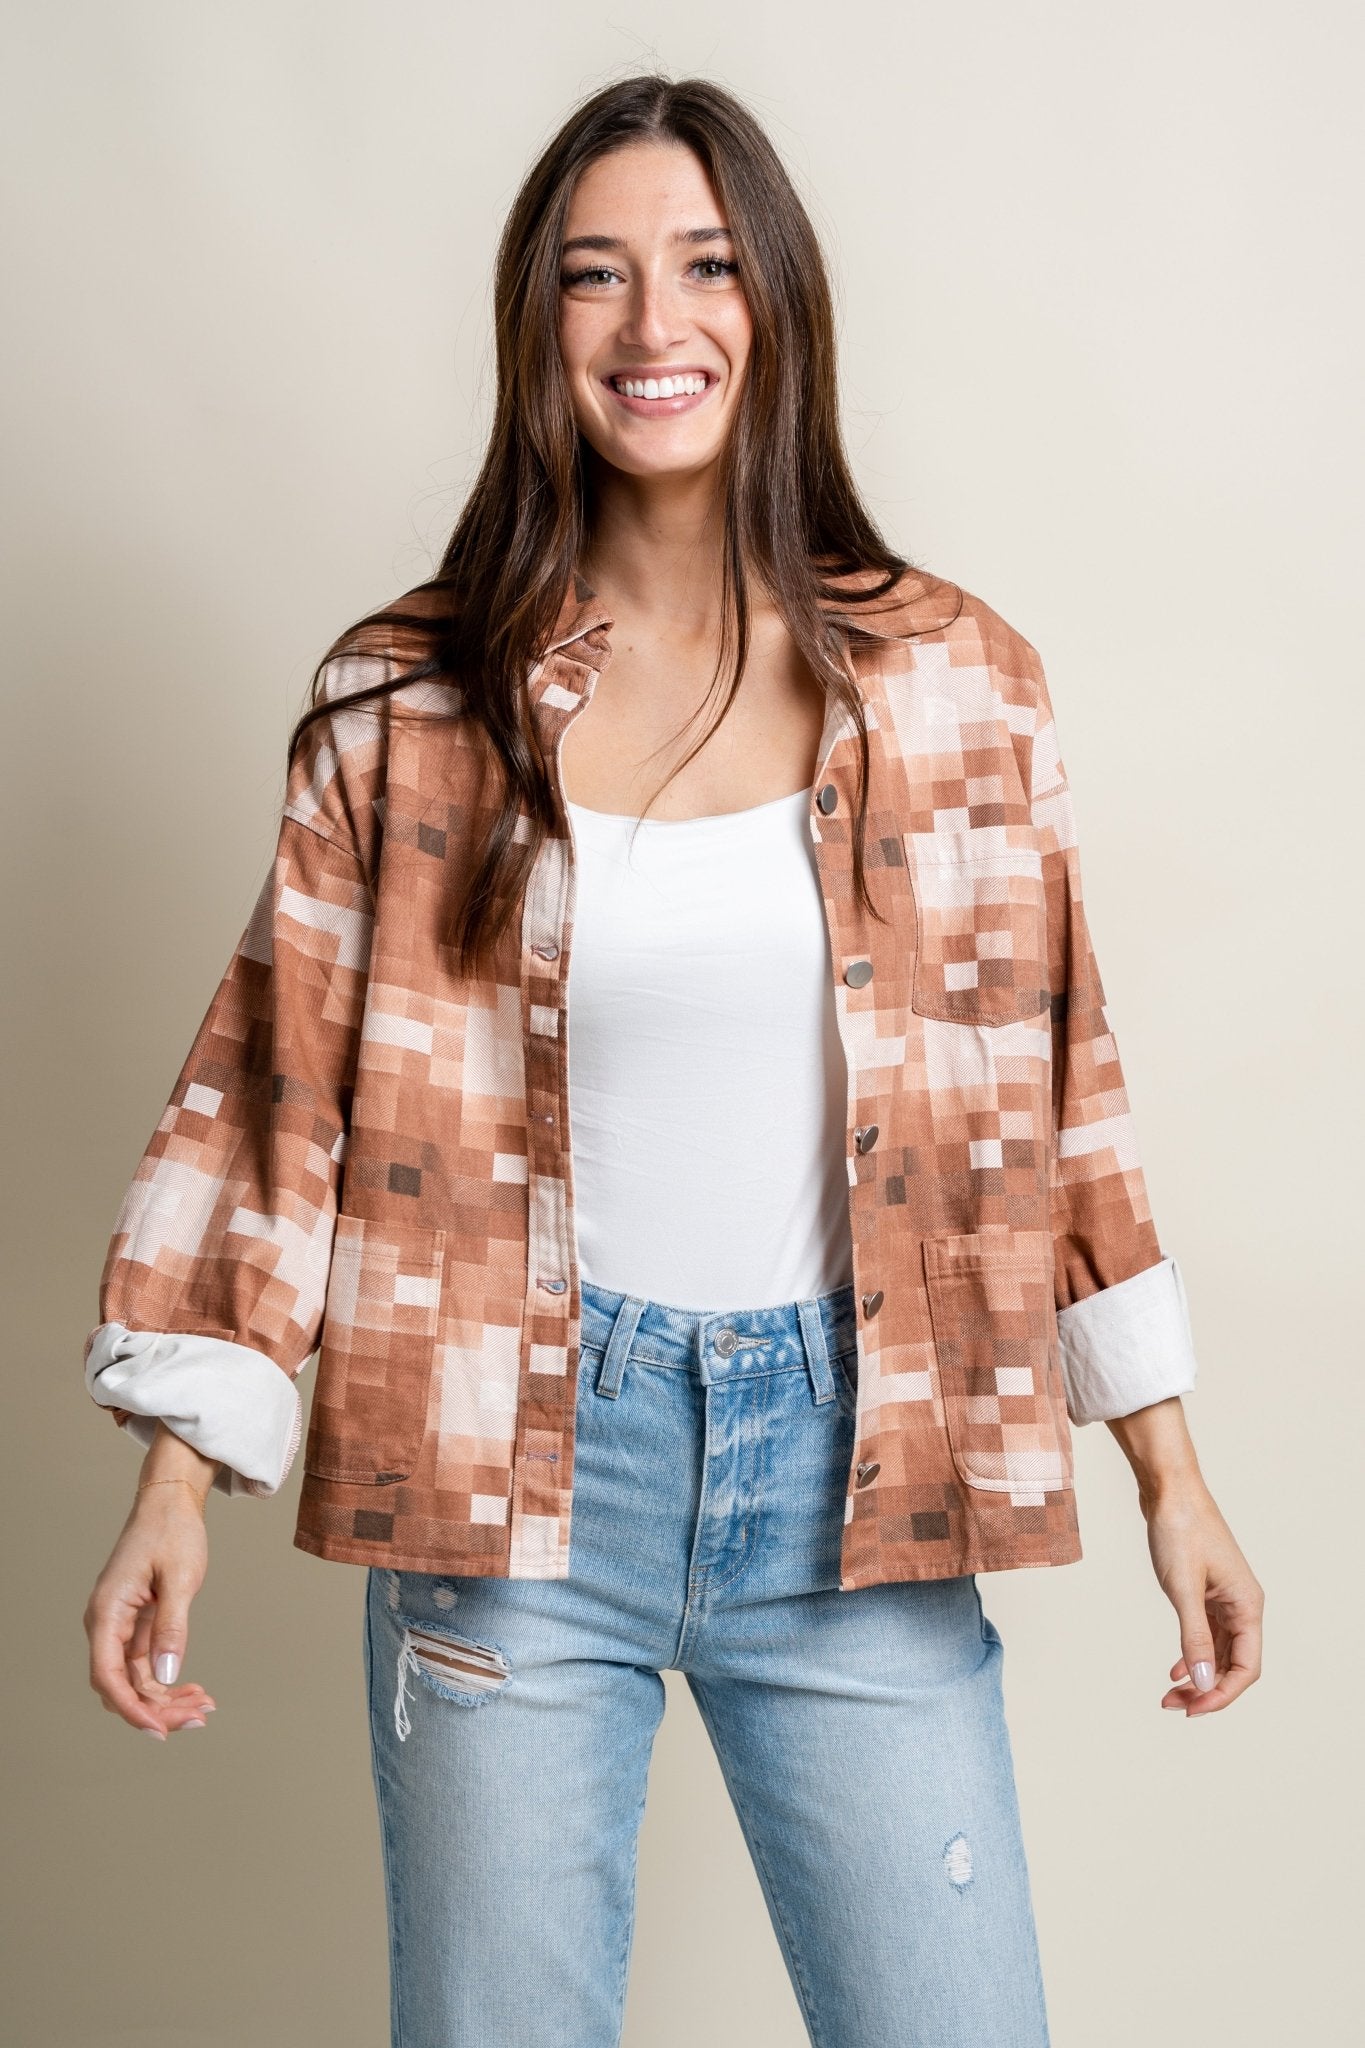 Checkered pocket detail jacket brick - Affordable jacket - Boutique Jackets & Blazers at Lush Fashion Lounge Boutique in Oklahoma City